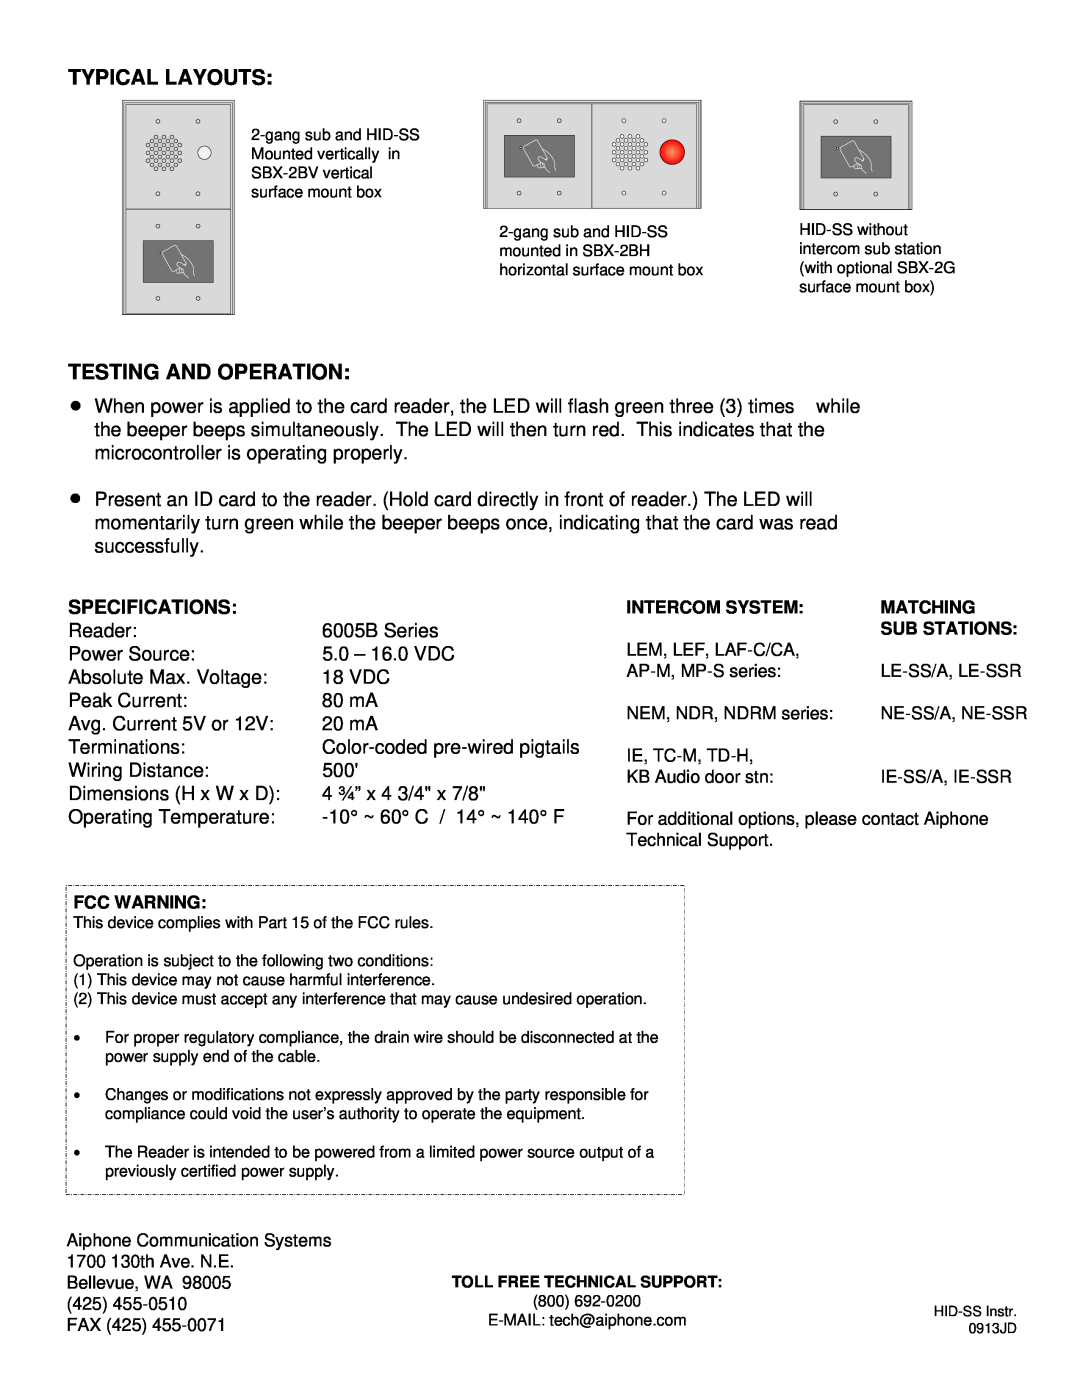 Aiphone HID-SS installation manual Typical Layouts, Testing And Operation, Specifications 